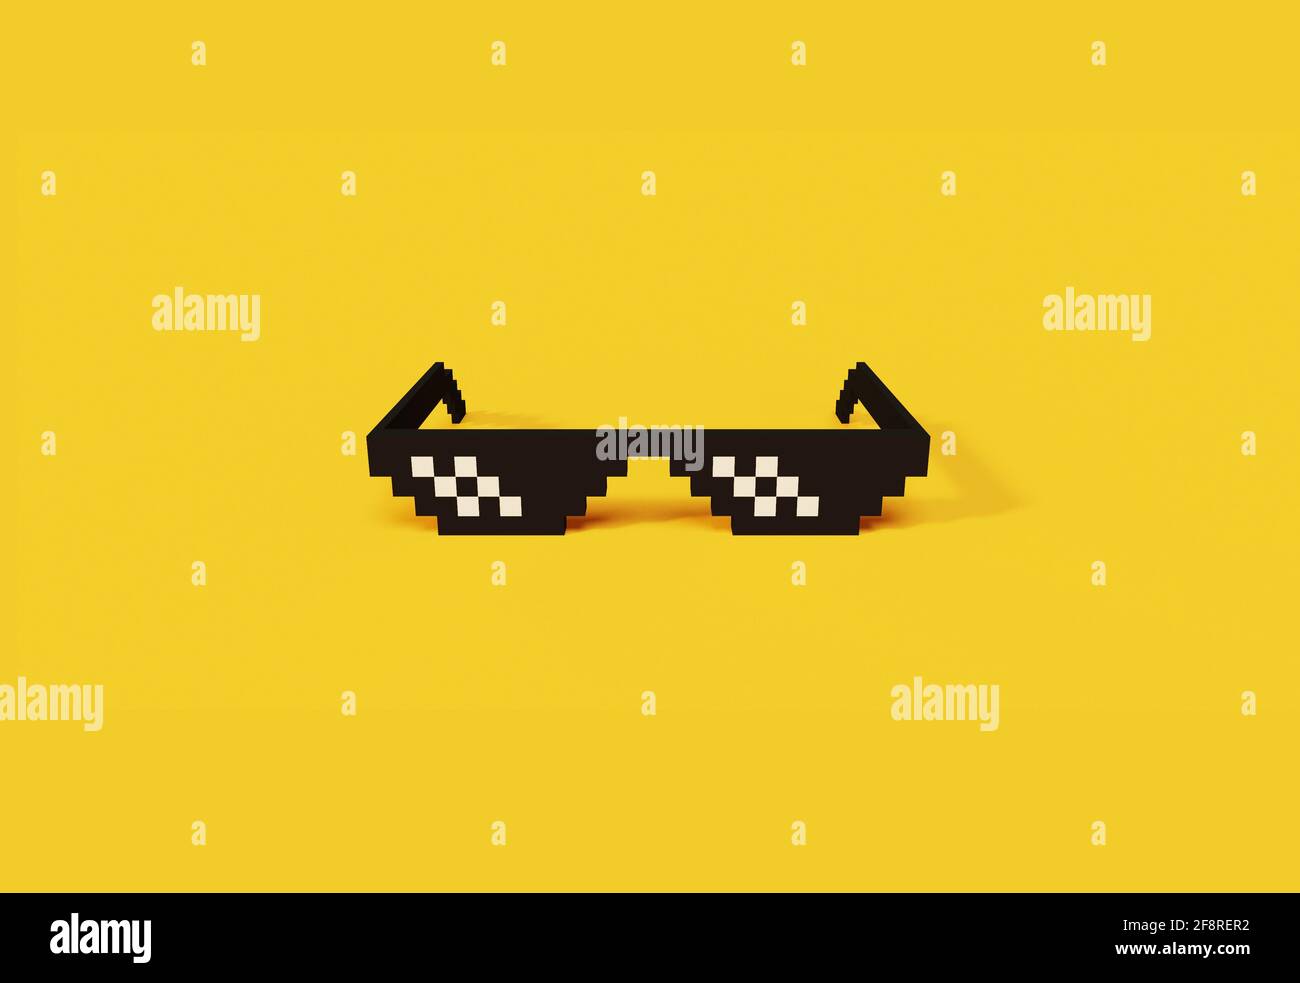 Thug life meme glasses pixel art modern iconic 3d object. Front view of pixel art glasses, 3D rendering minimalistic object on yellow background. Web Stock Photo